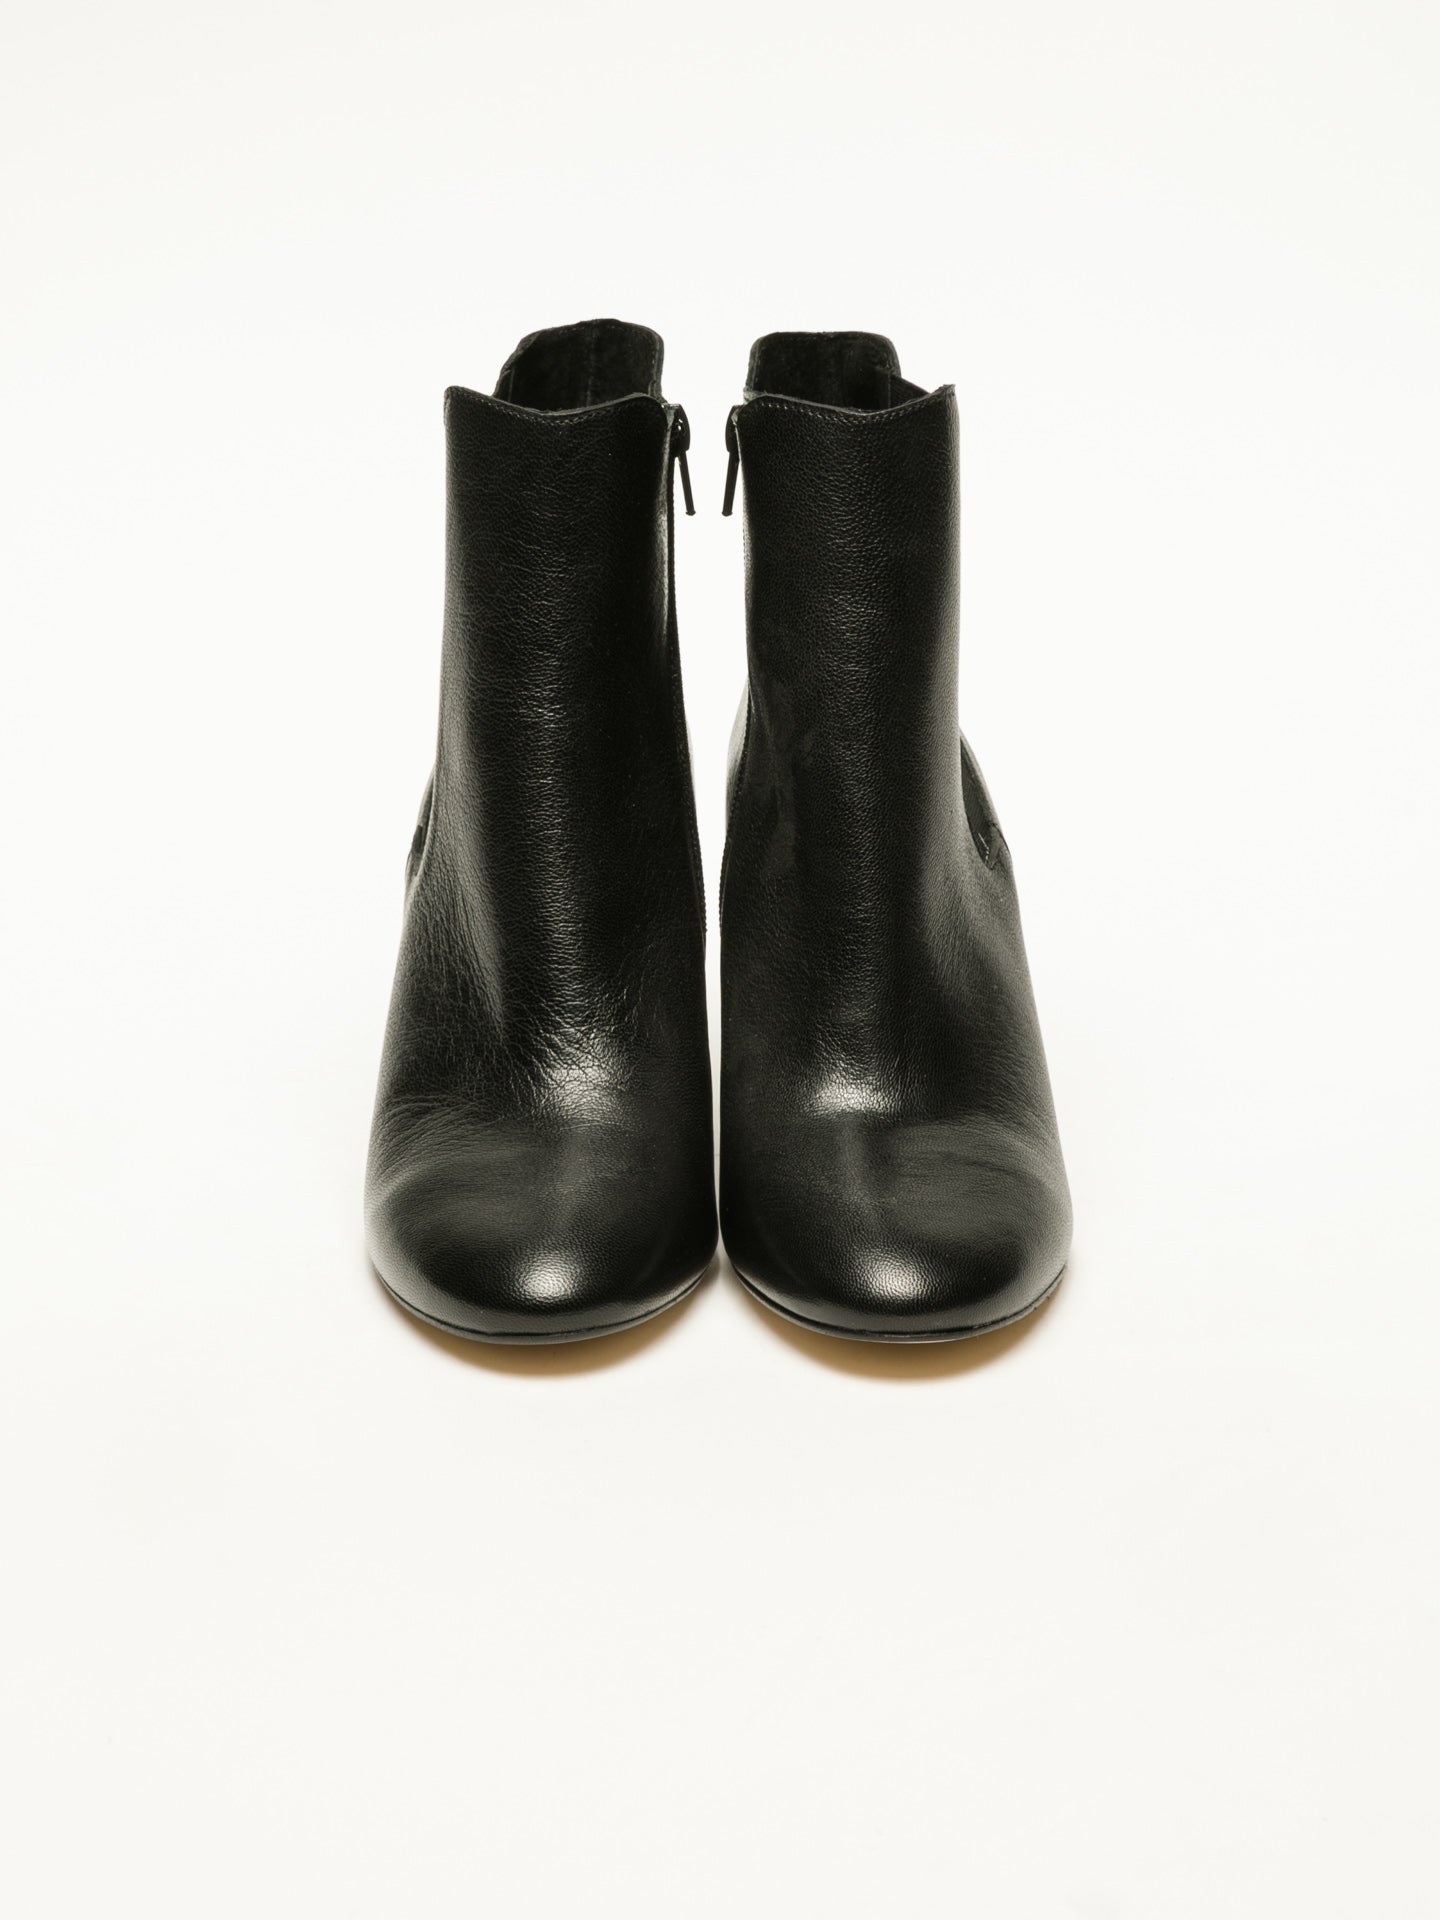 Foreva Black Elasticated Ankle Boots